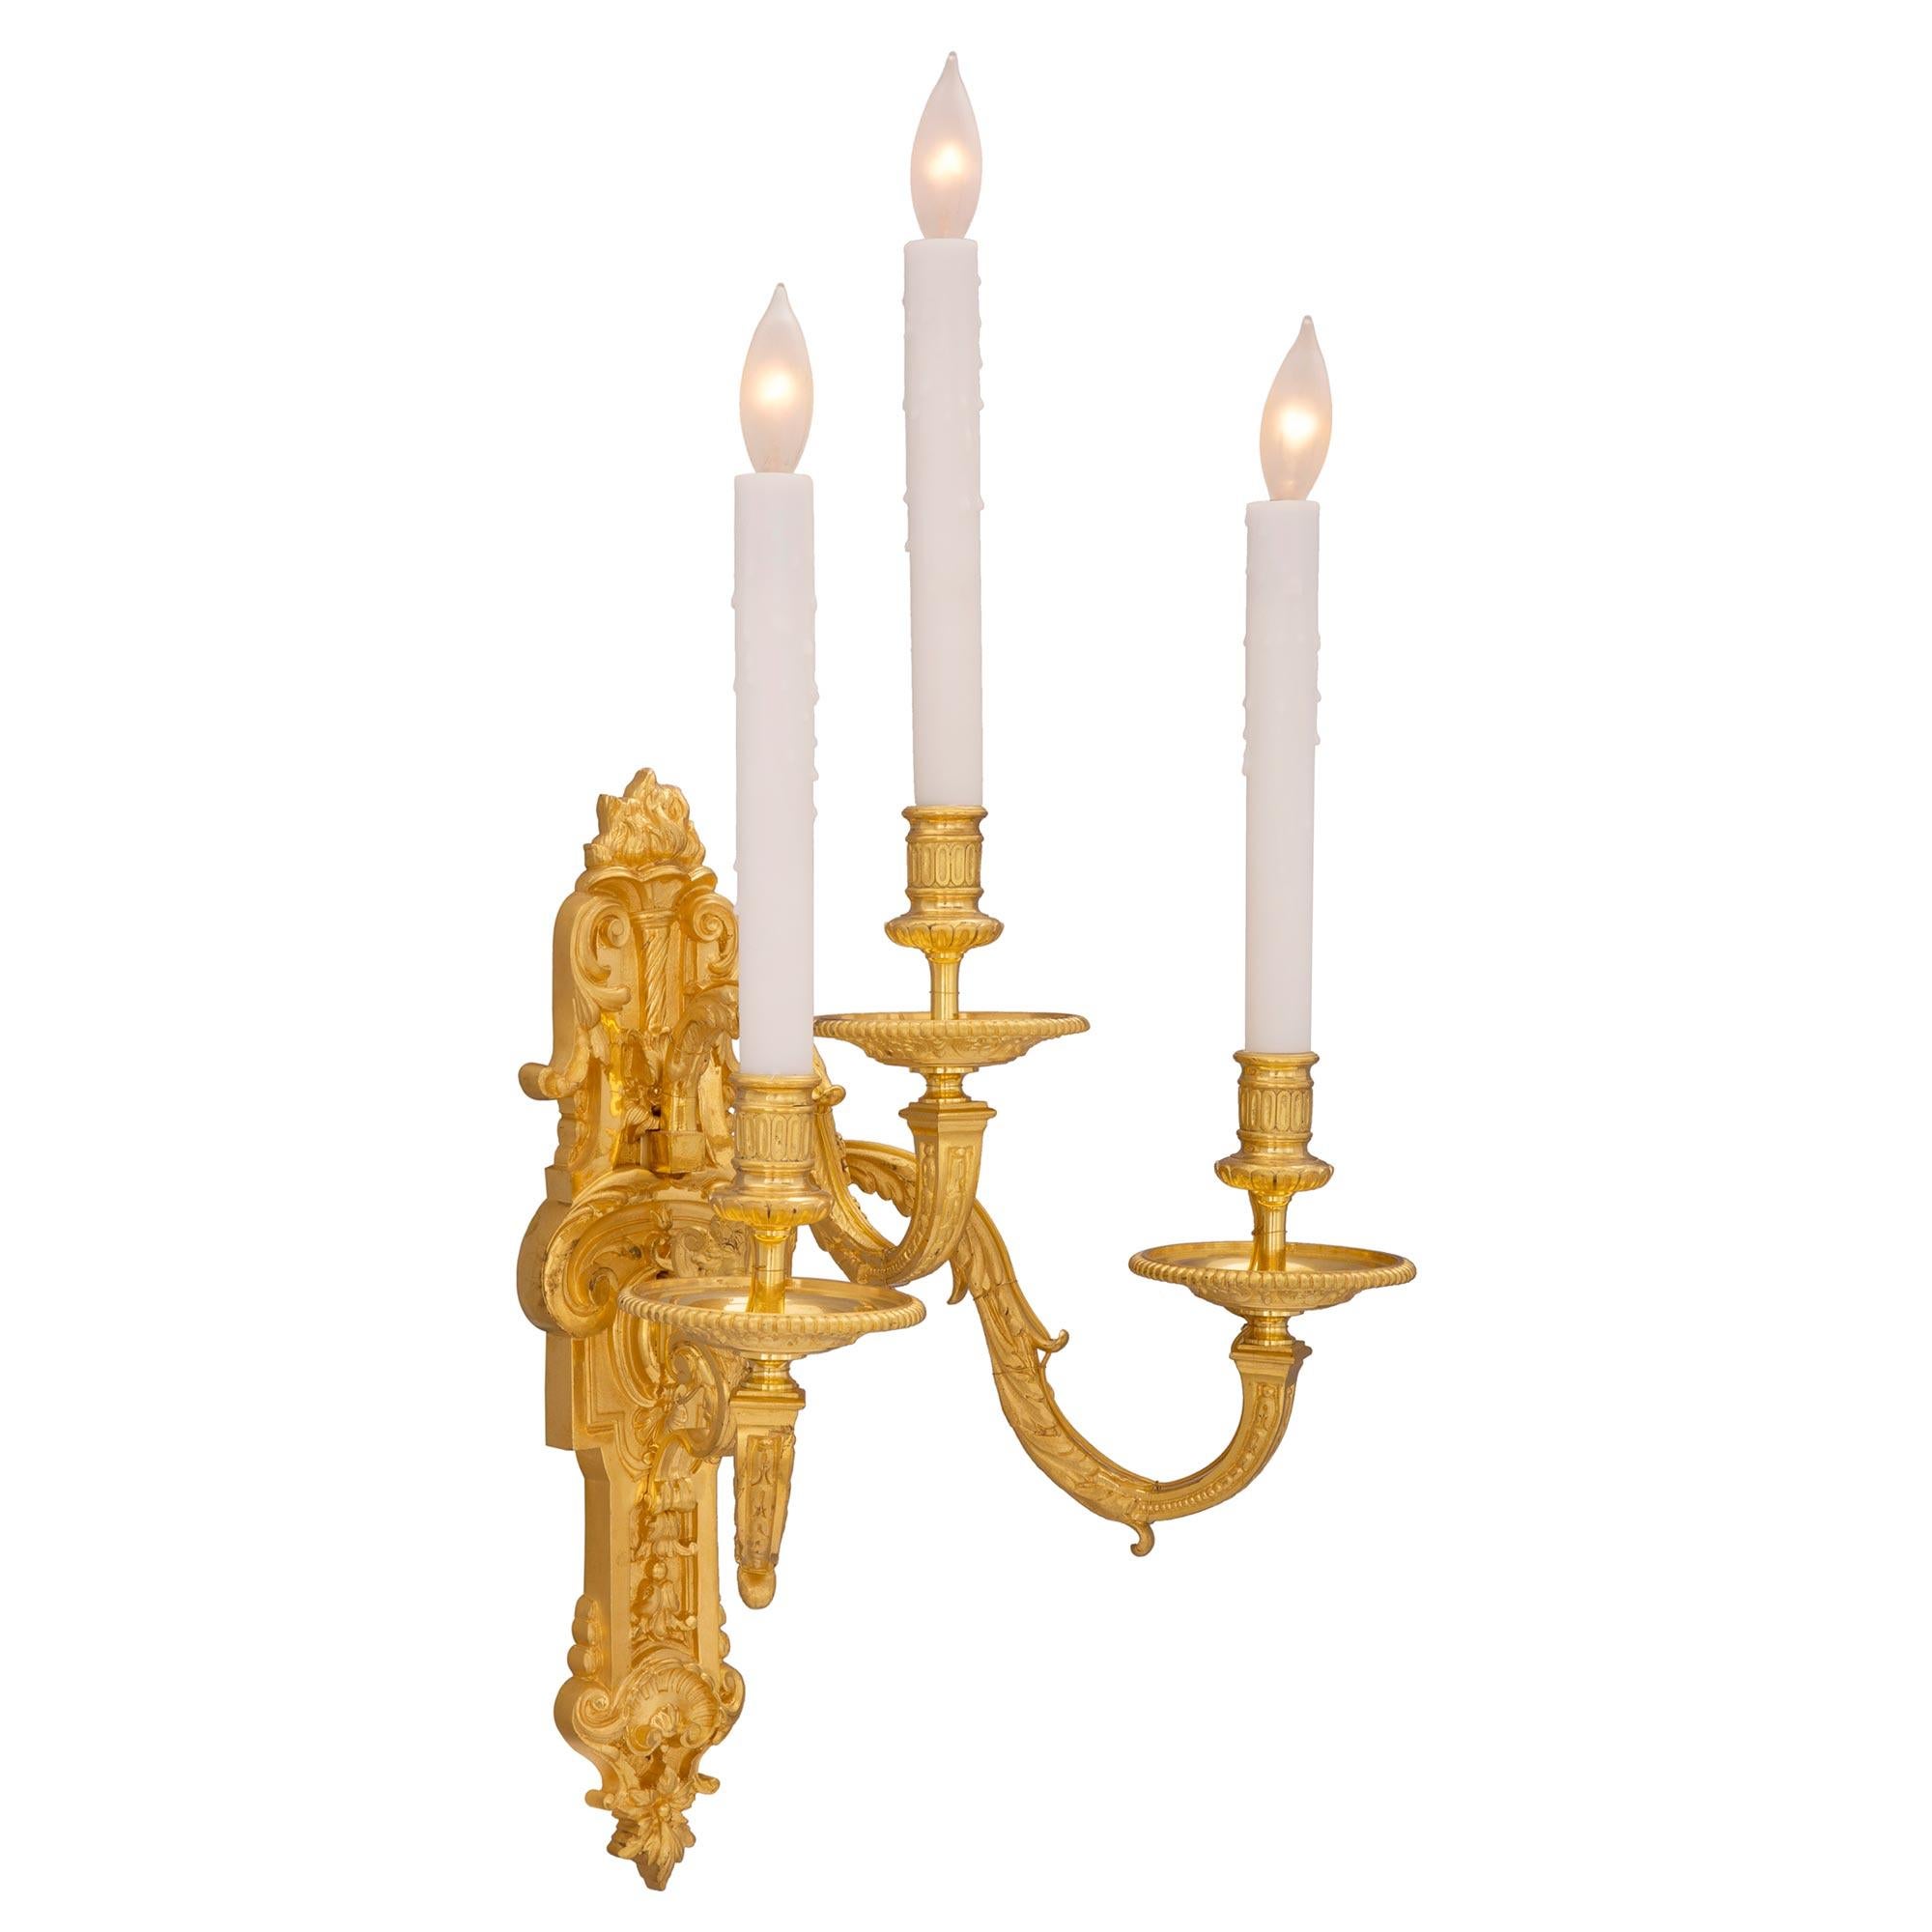 A striking pair of French 19th century Louis XVI st. ormolu sconces. Each three arm sconce is centered by a richly chased and wonderfully detailed backplate with a bottom seashell reserve, lovely foliate designs and an impressive eternal flame above